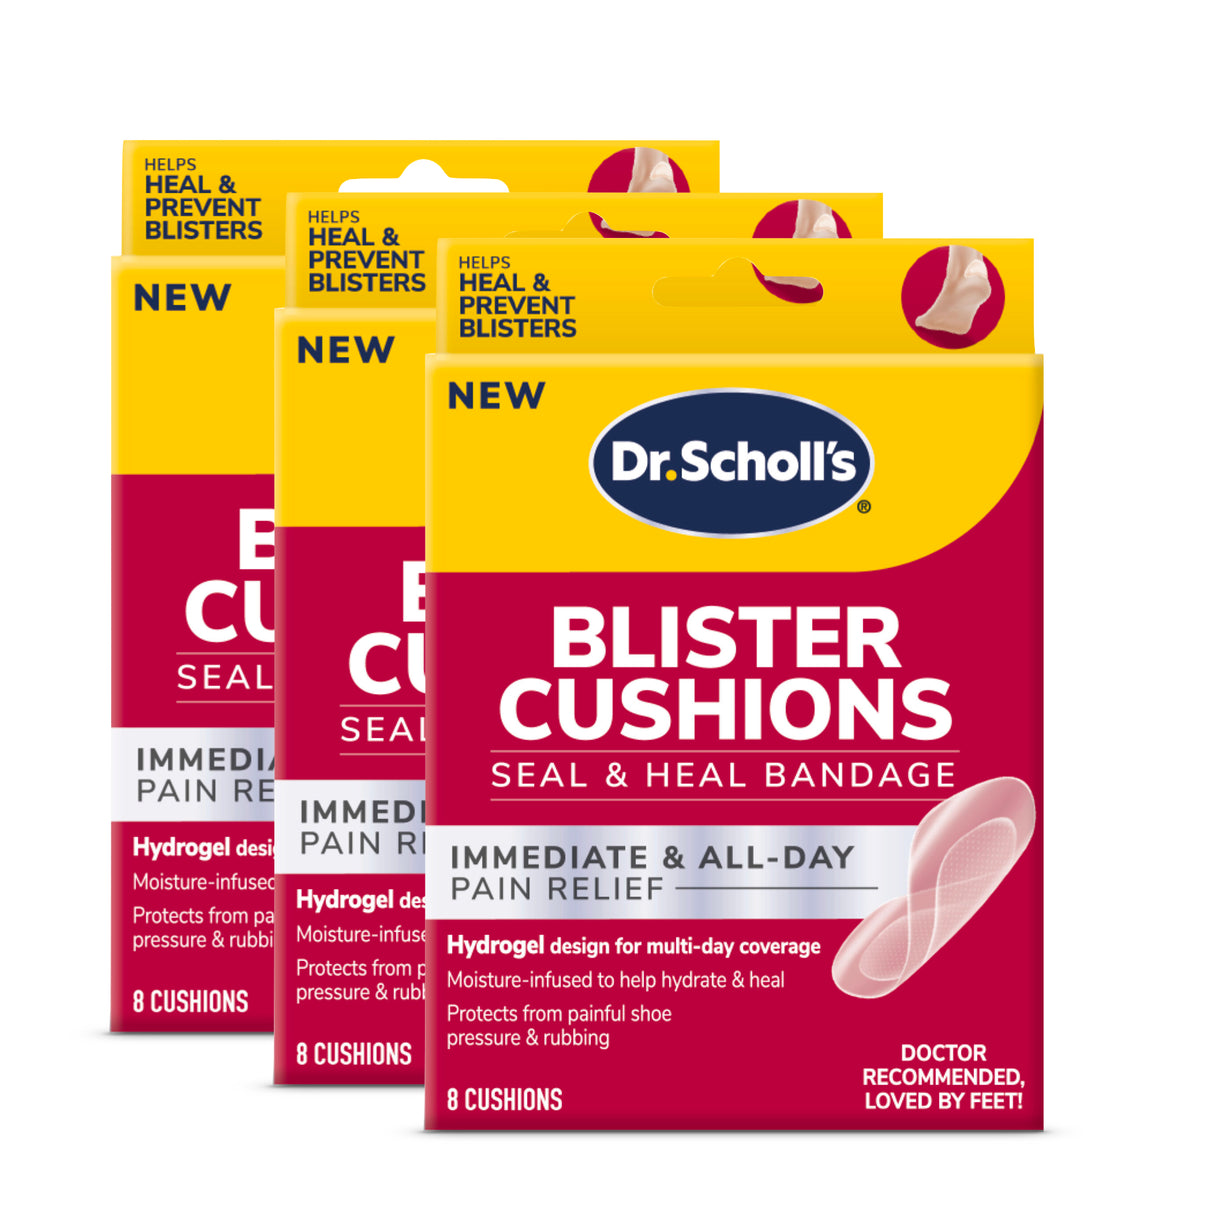 Blister Cushions Seal & Heal Bandage with Hydrogel Technology (3 Pack)